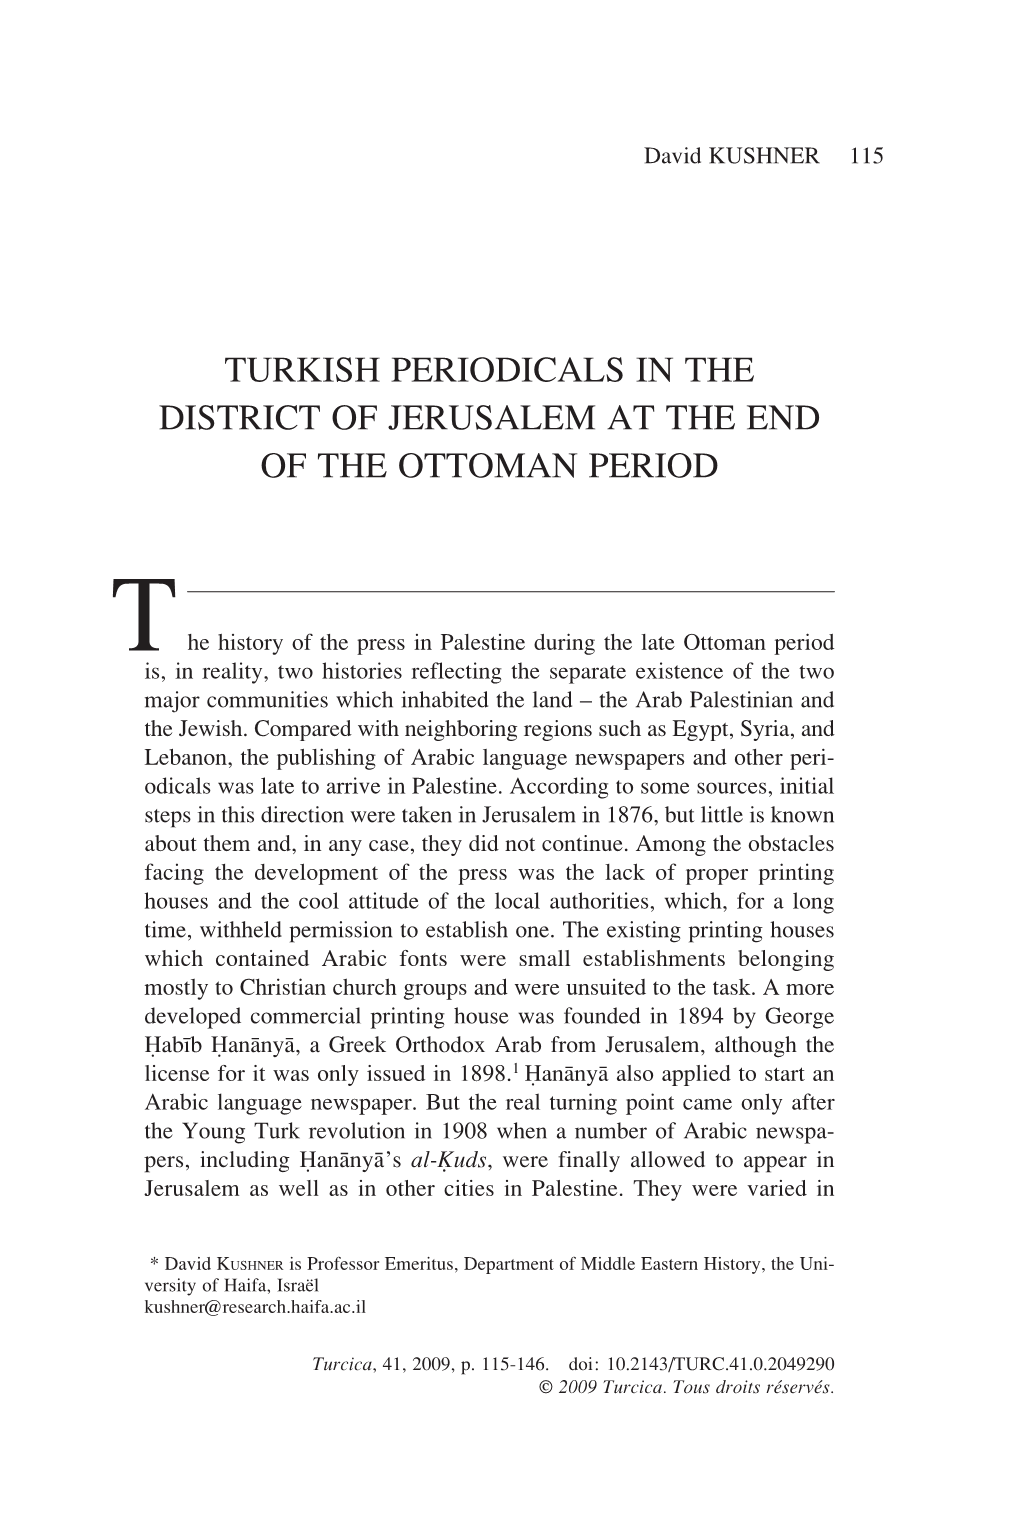 Turkish Periodicals in the District of Jerusalem at the End of the Ottoman Period